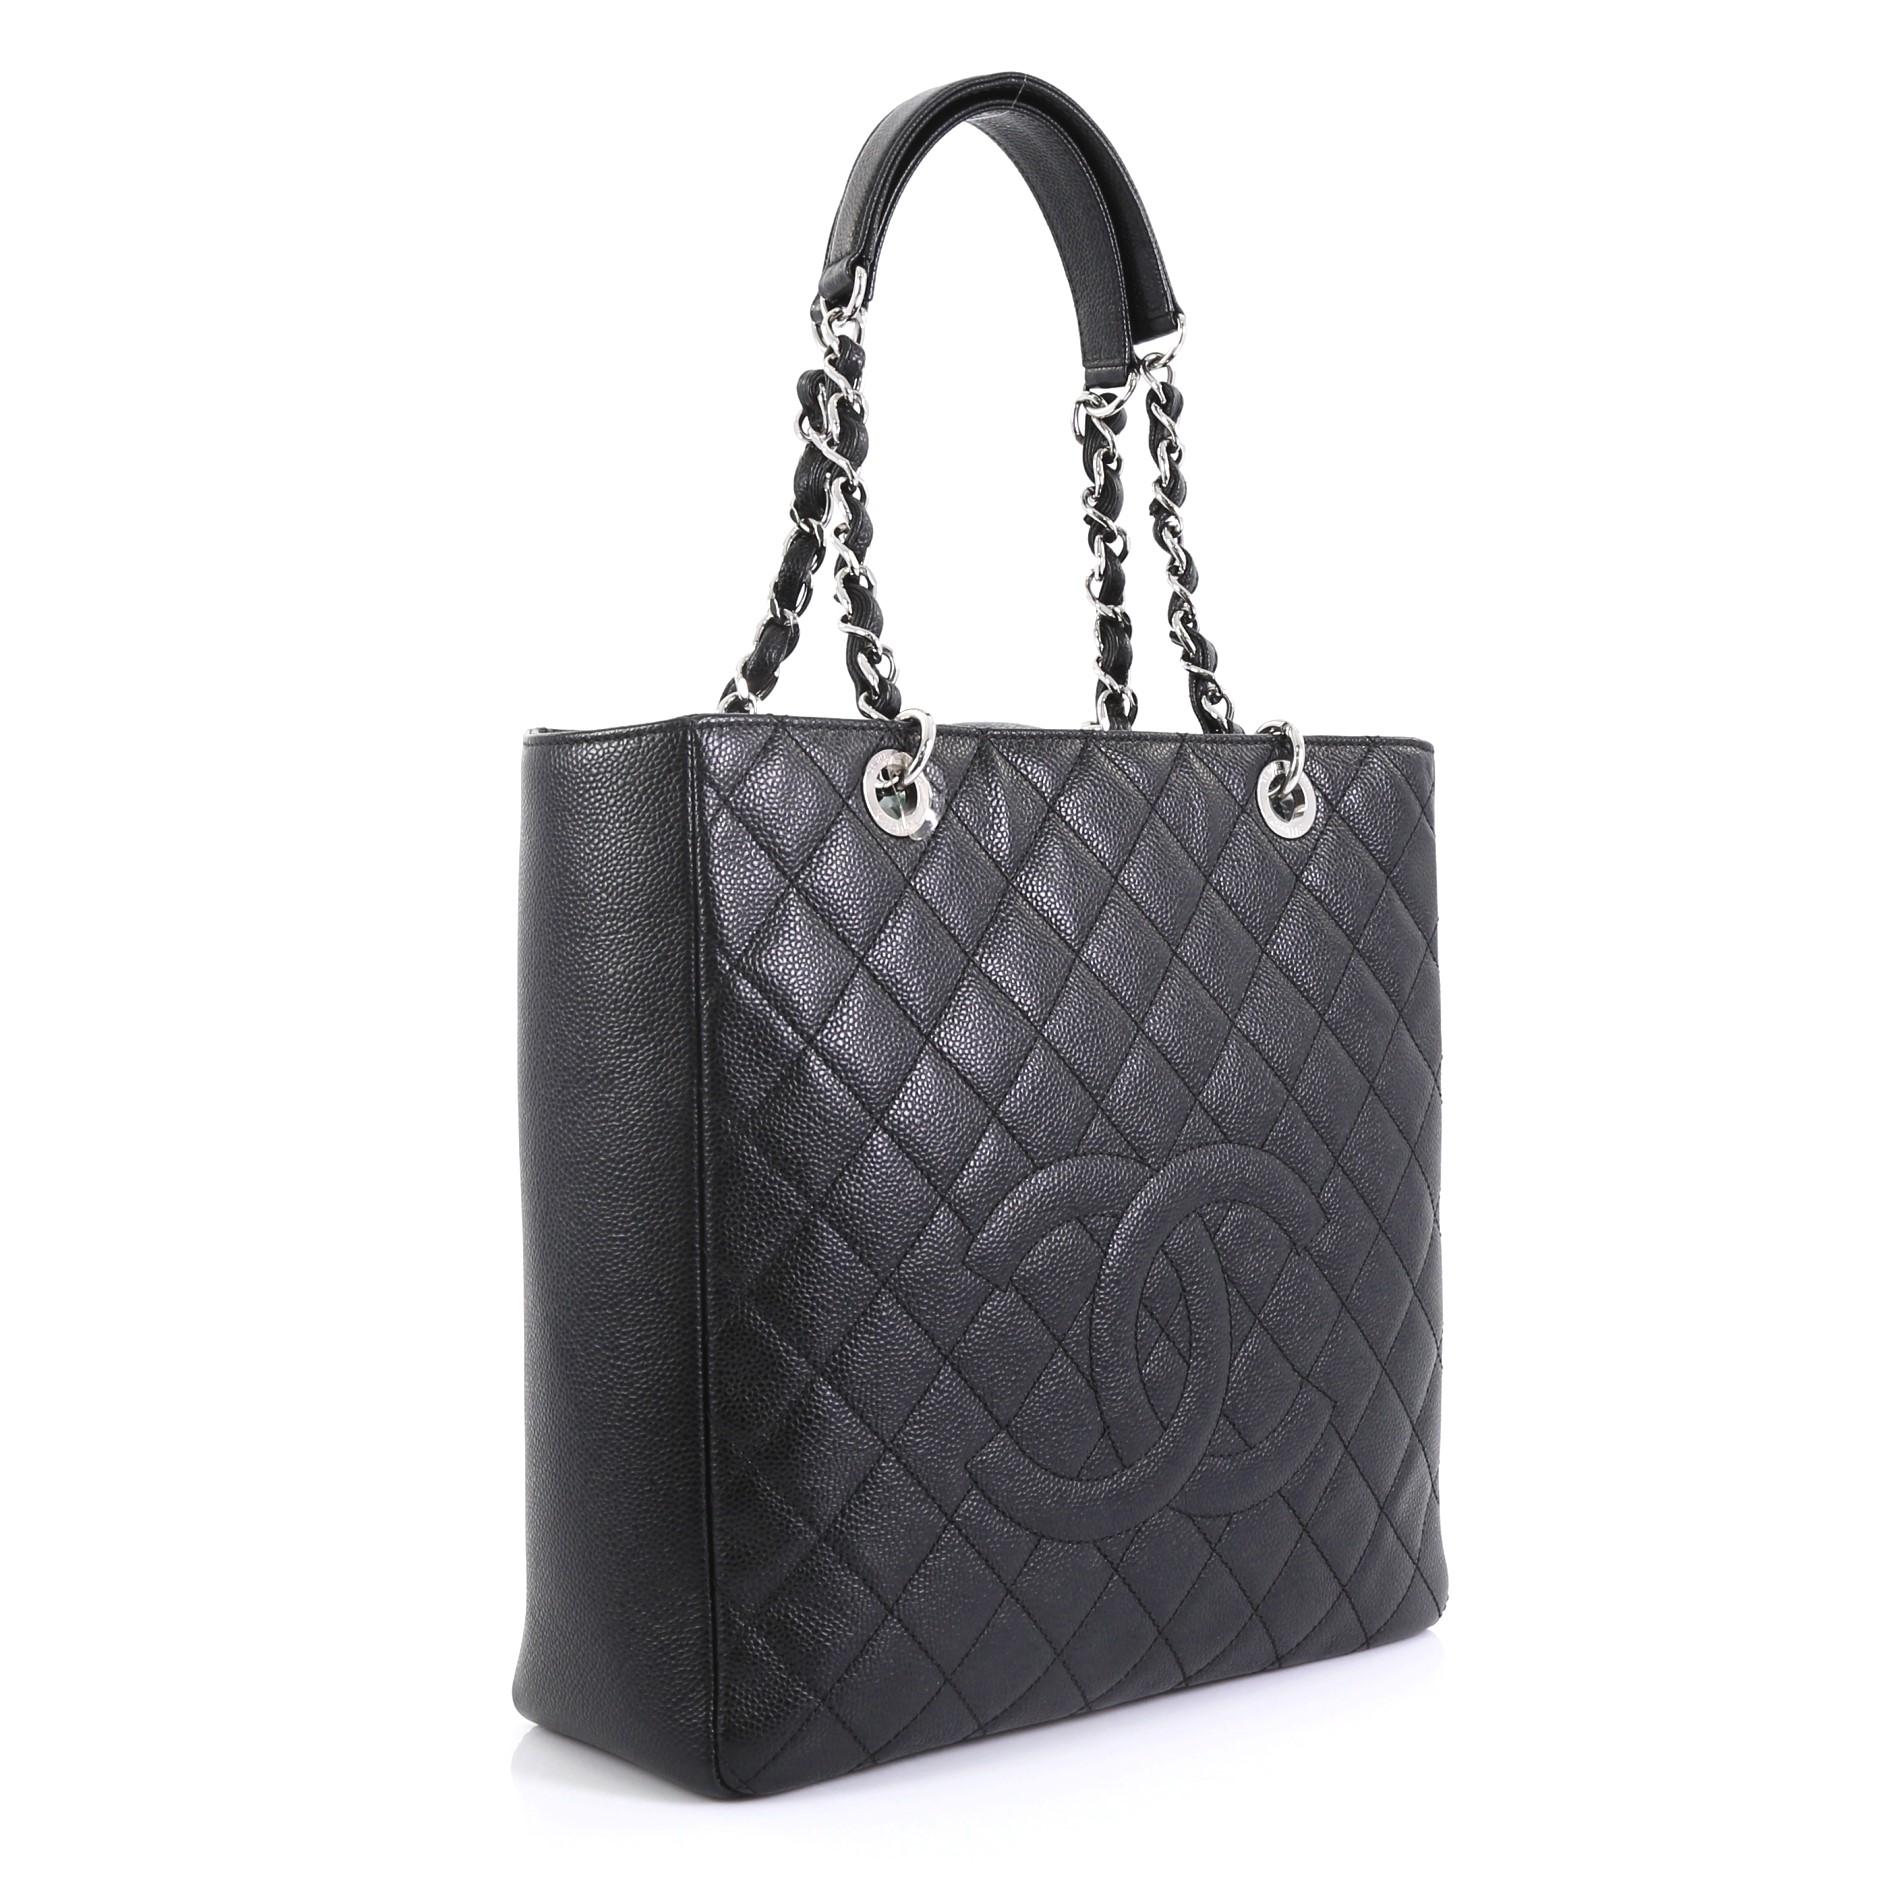 This Chanel Petite Shopping Tote Quilted Caviar Large, crafted from black quilted caviar leather, features dual woven-in leather chain straps with leather pads, stitched CC logo, exterior back slip pocket, and silver-tone hardware. Its magnetic snap